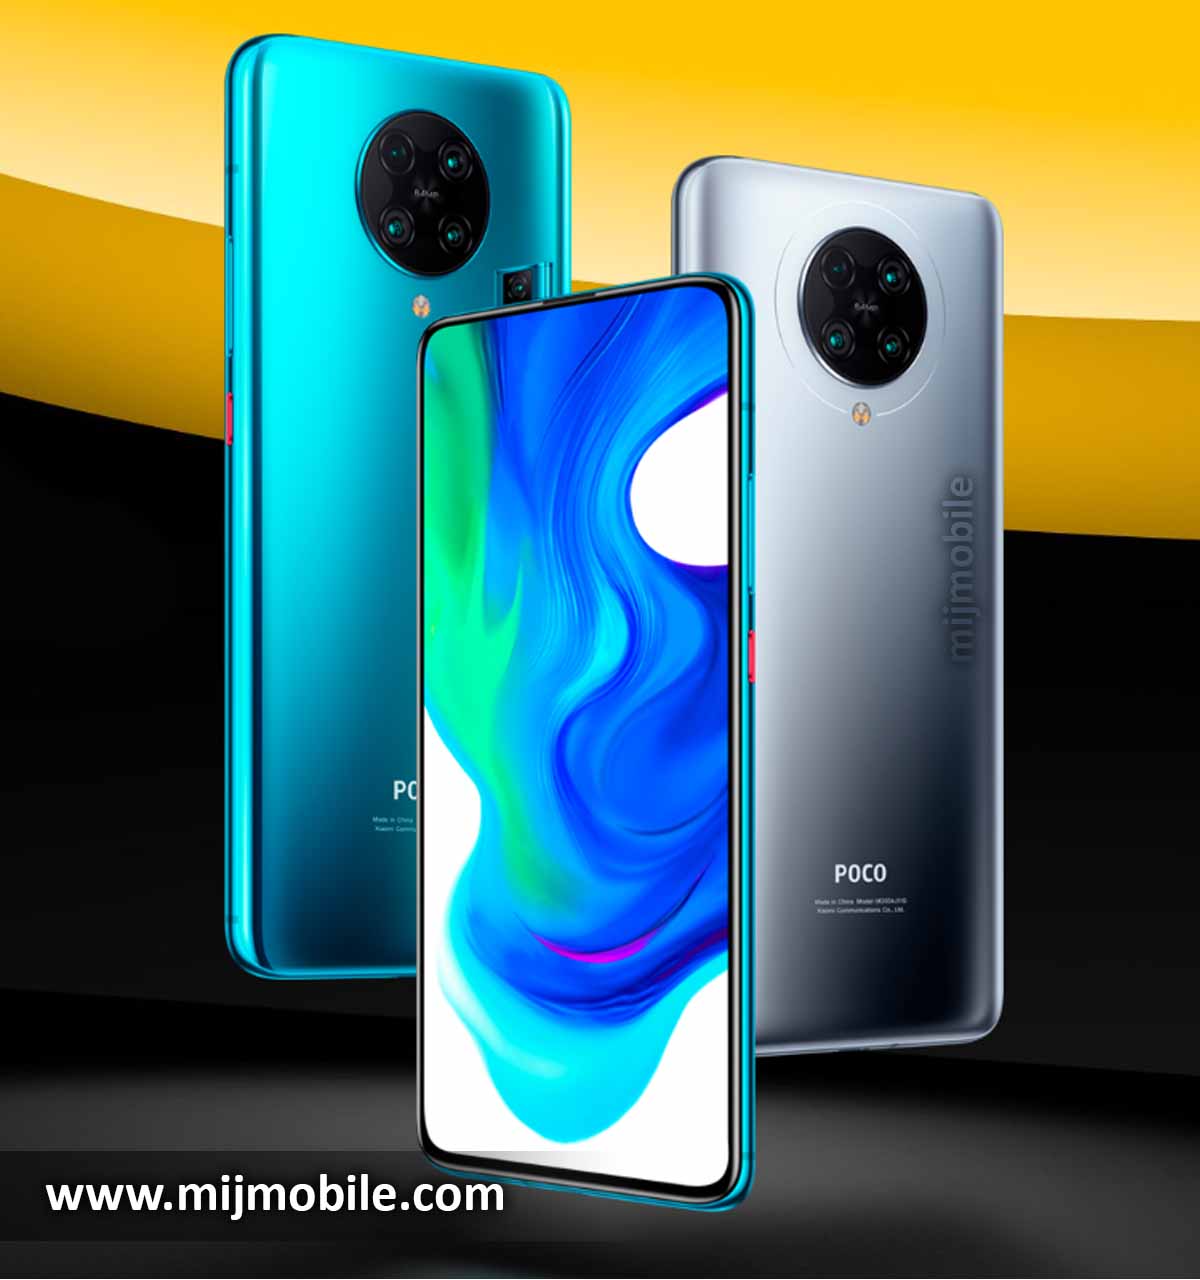 Xiaomi Pocophone F2 Pro Price in Pakistan & Specifications Xiaomi Pocophone F2 Pro Price in Pakistan is only 112,000.